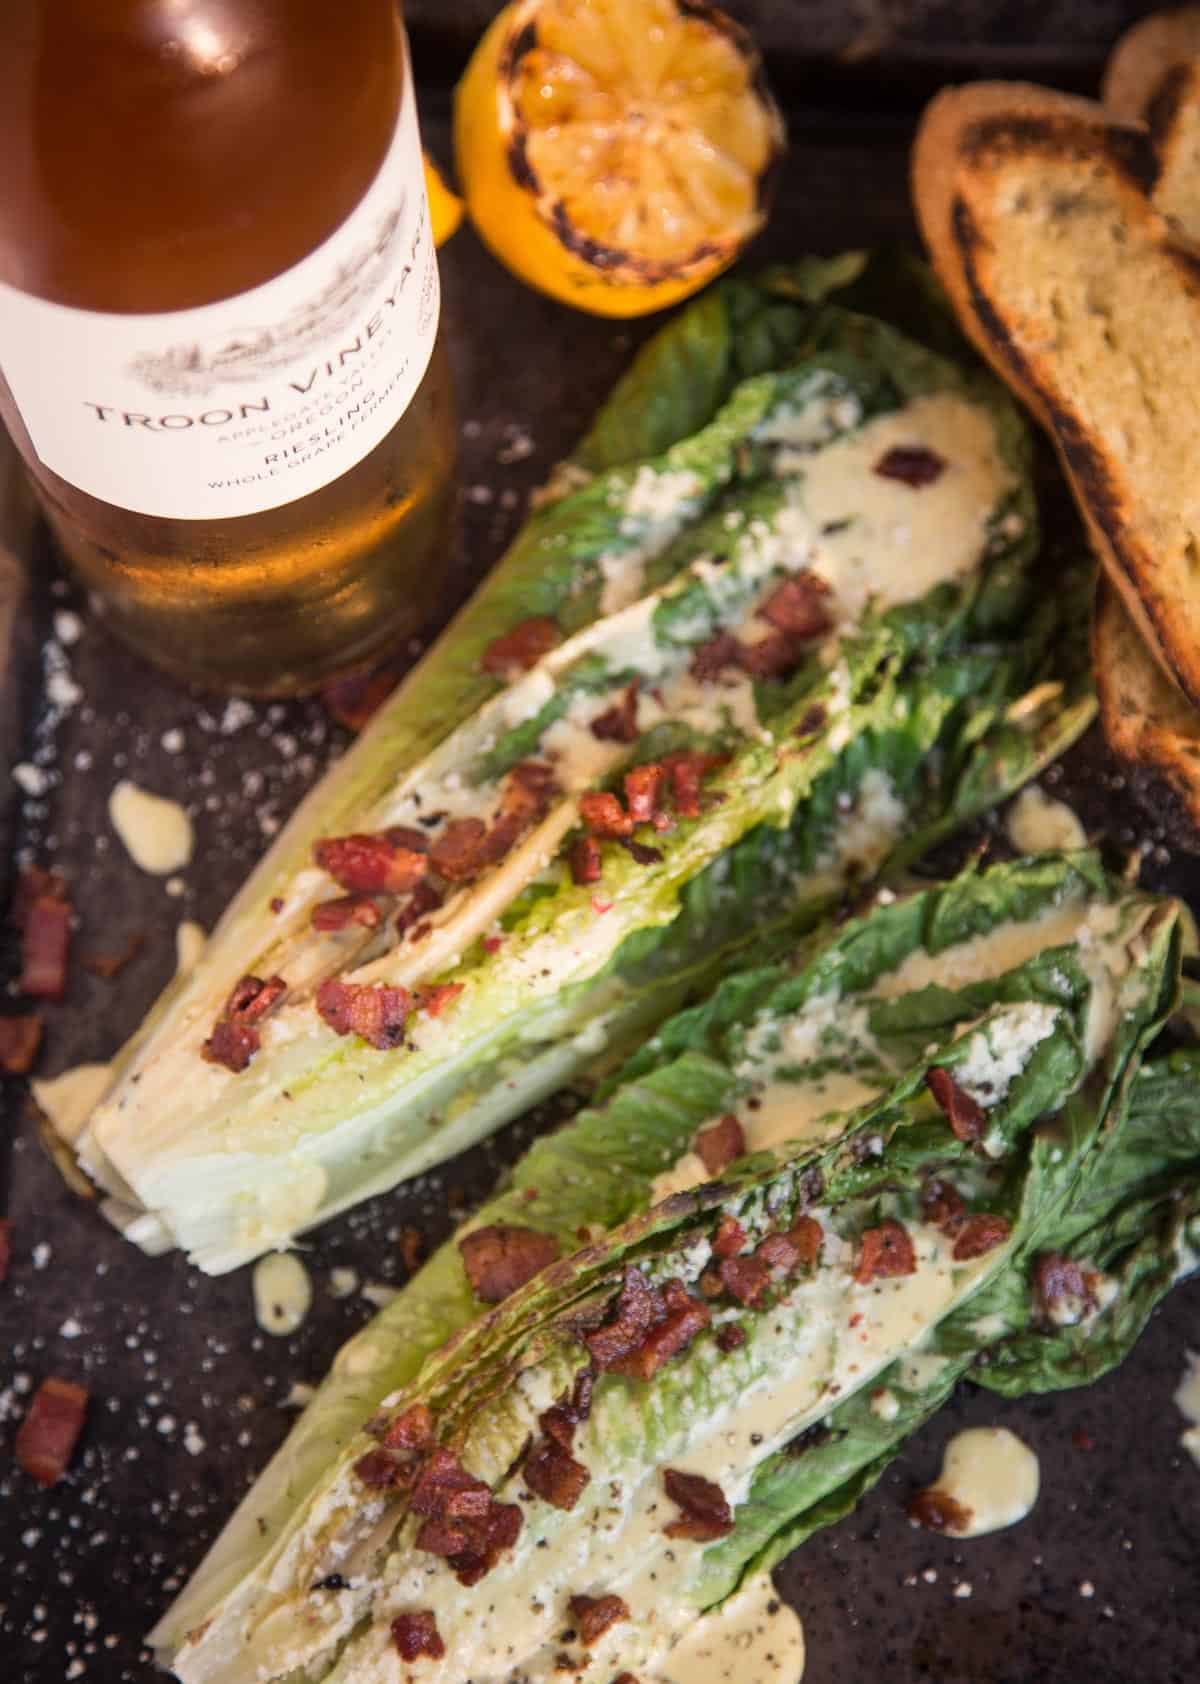 Grilled Caesar salad on a platter with a bottle of wine 